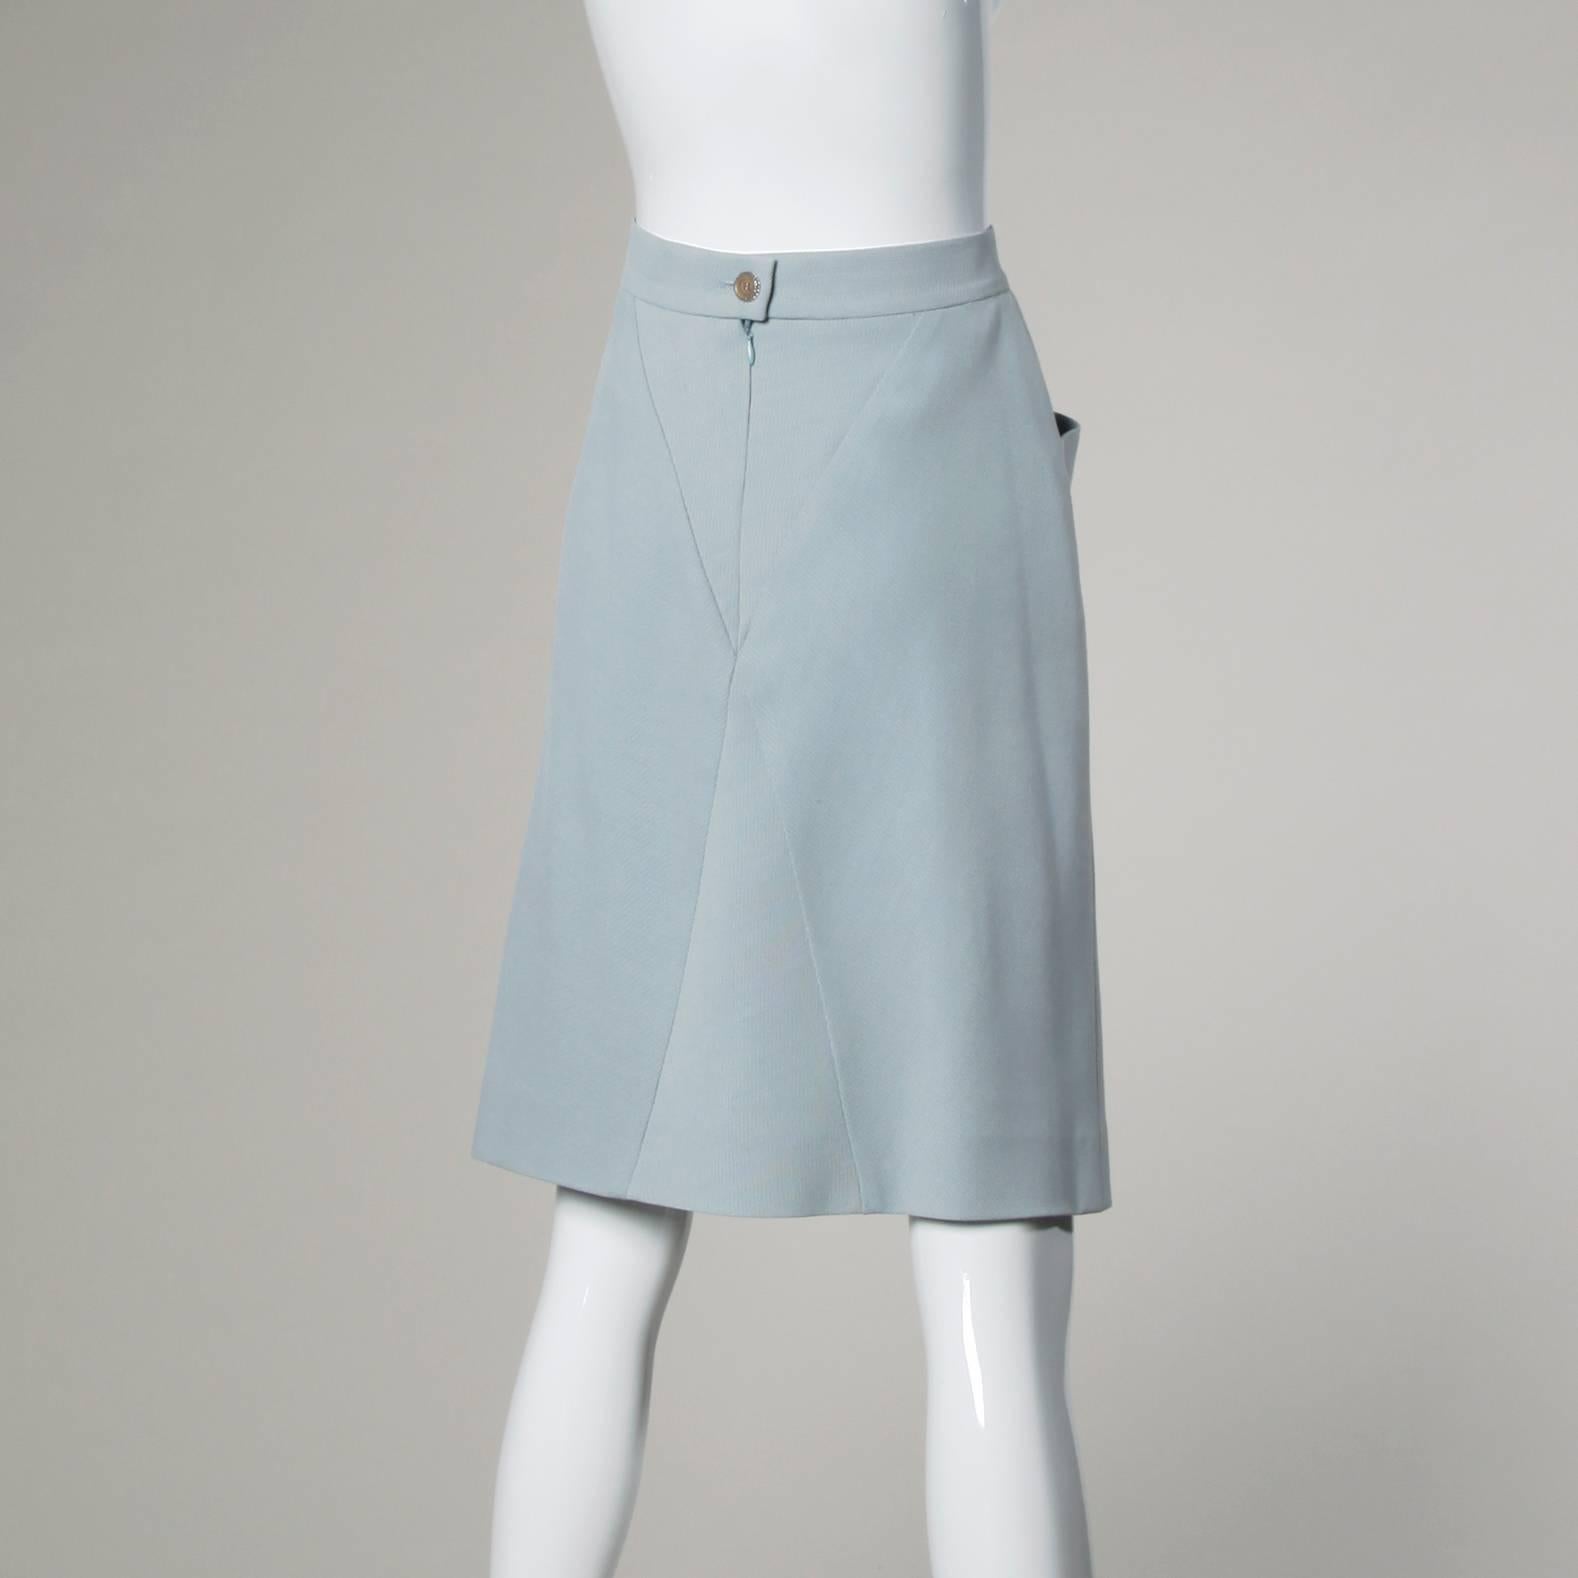 Incredible pale blue Karl Lagerfeld skirt with unique and flattering geometric seams. Beautiful form fitting design.

Details:

Fully Lined
Front Pockets
Back Button and Zip Closure
Marked Size: IT 42
Color: Pale Blue
Fabric: 37% Polyamid/